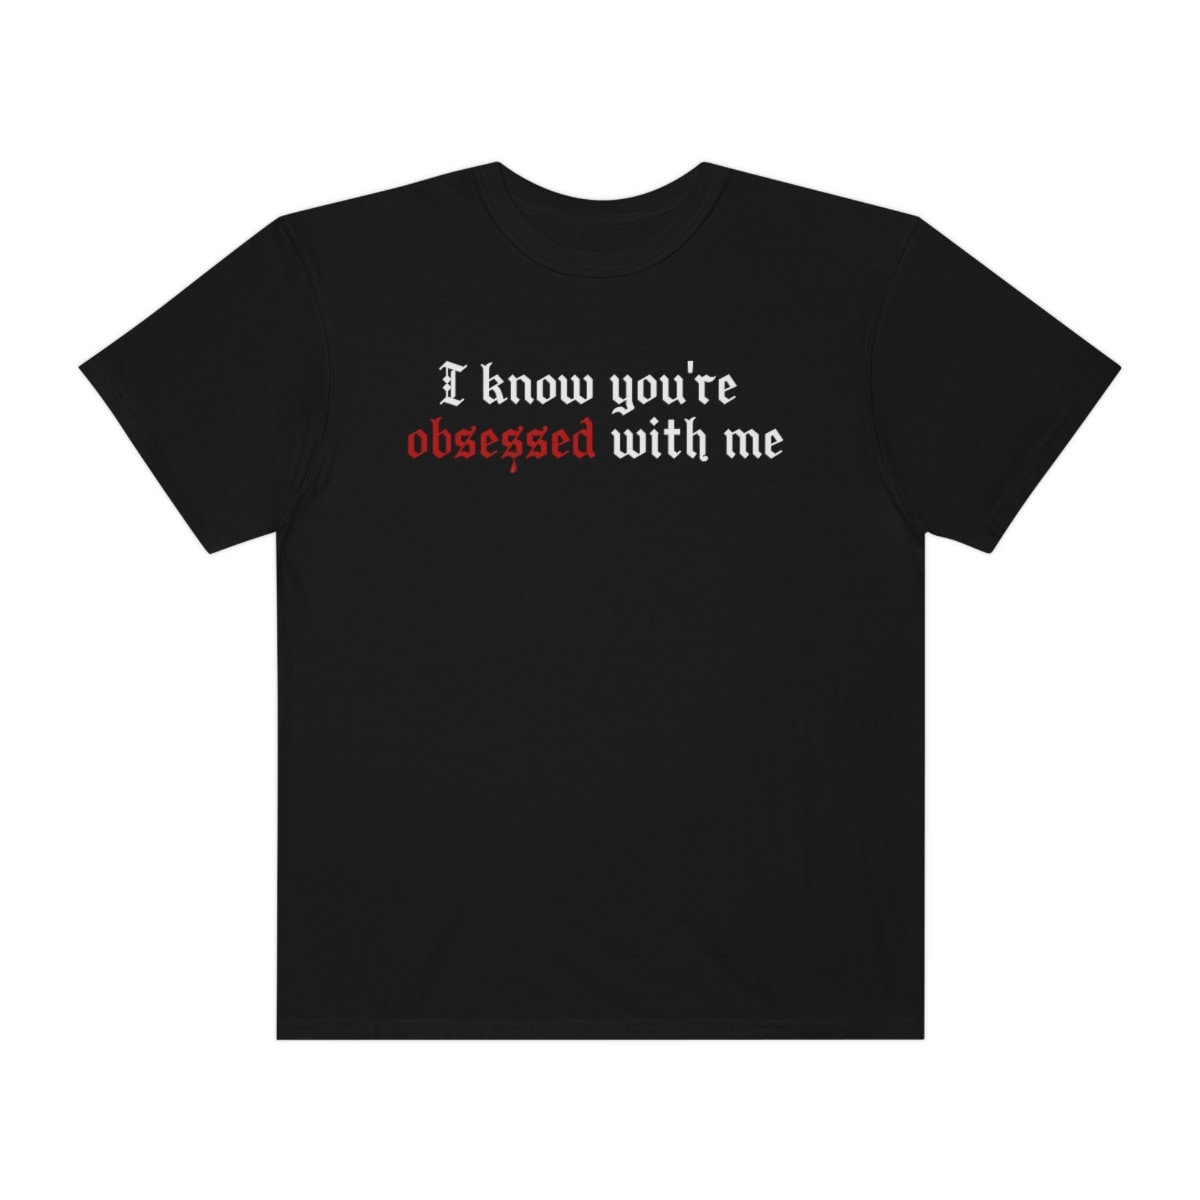 TVD Shirt,  Damon Salvatore shirt, tvd fan gift, The Vampire Diaries shirt, TVD Fan, TVD xmas gift, I know you're obsessed with me